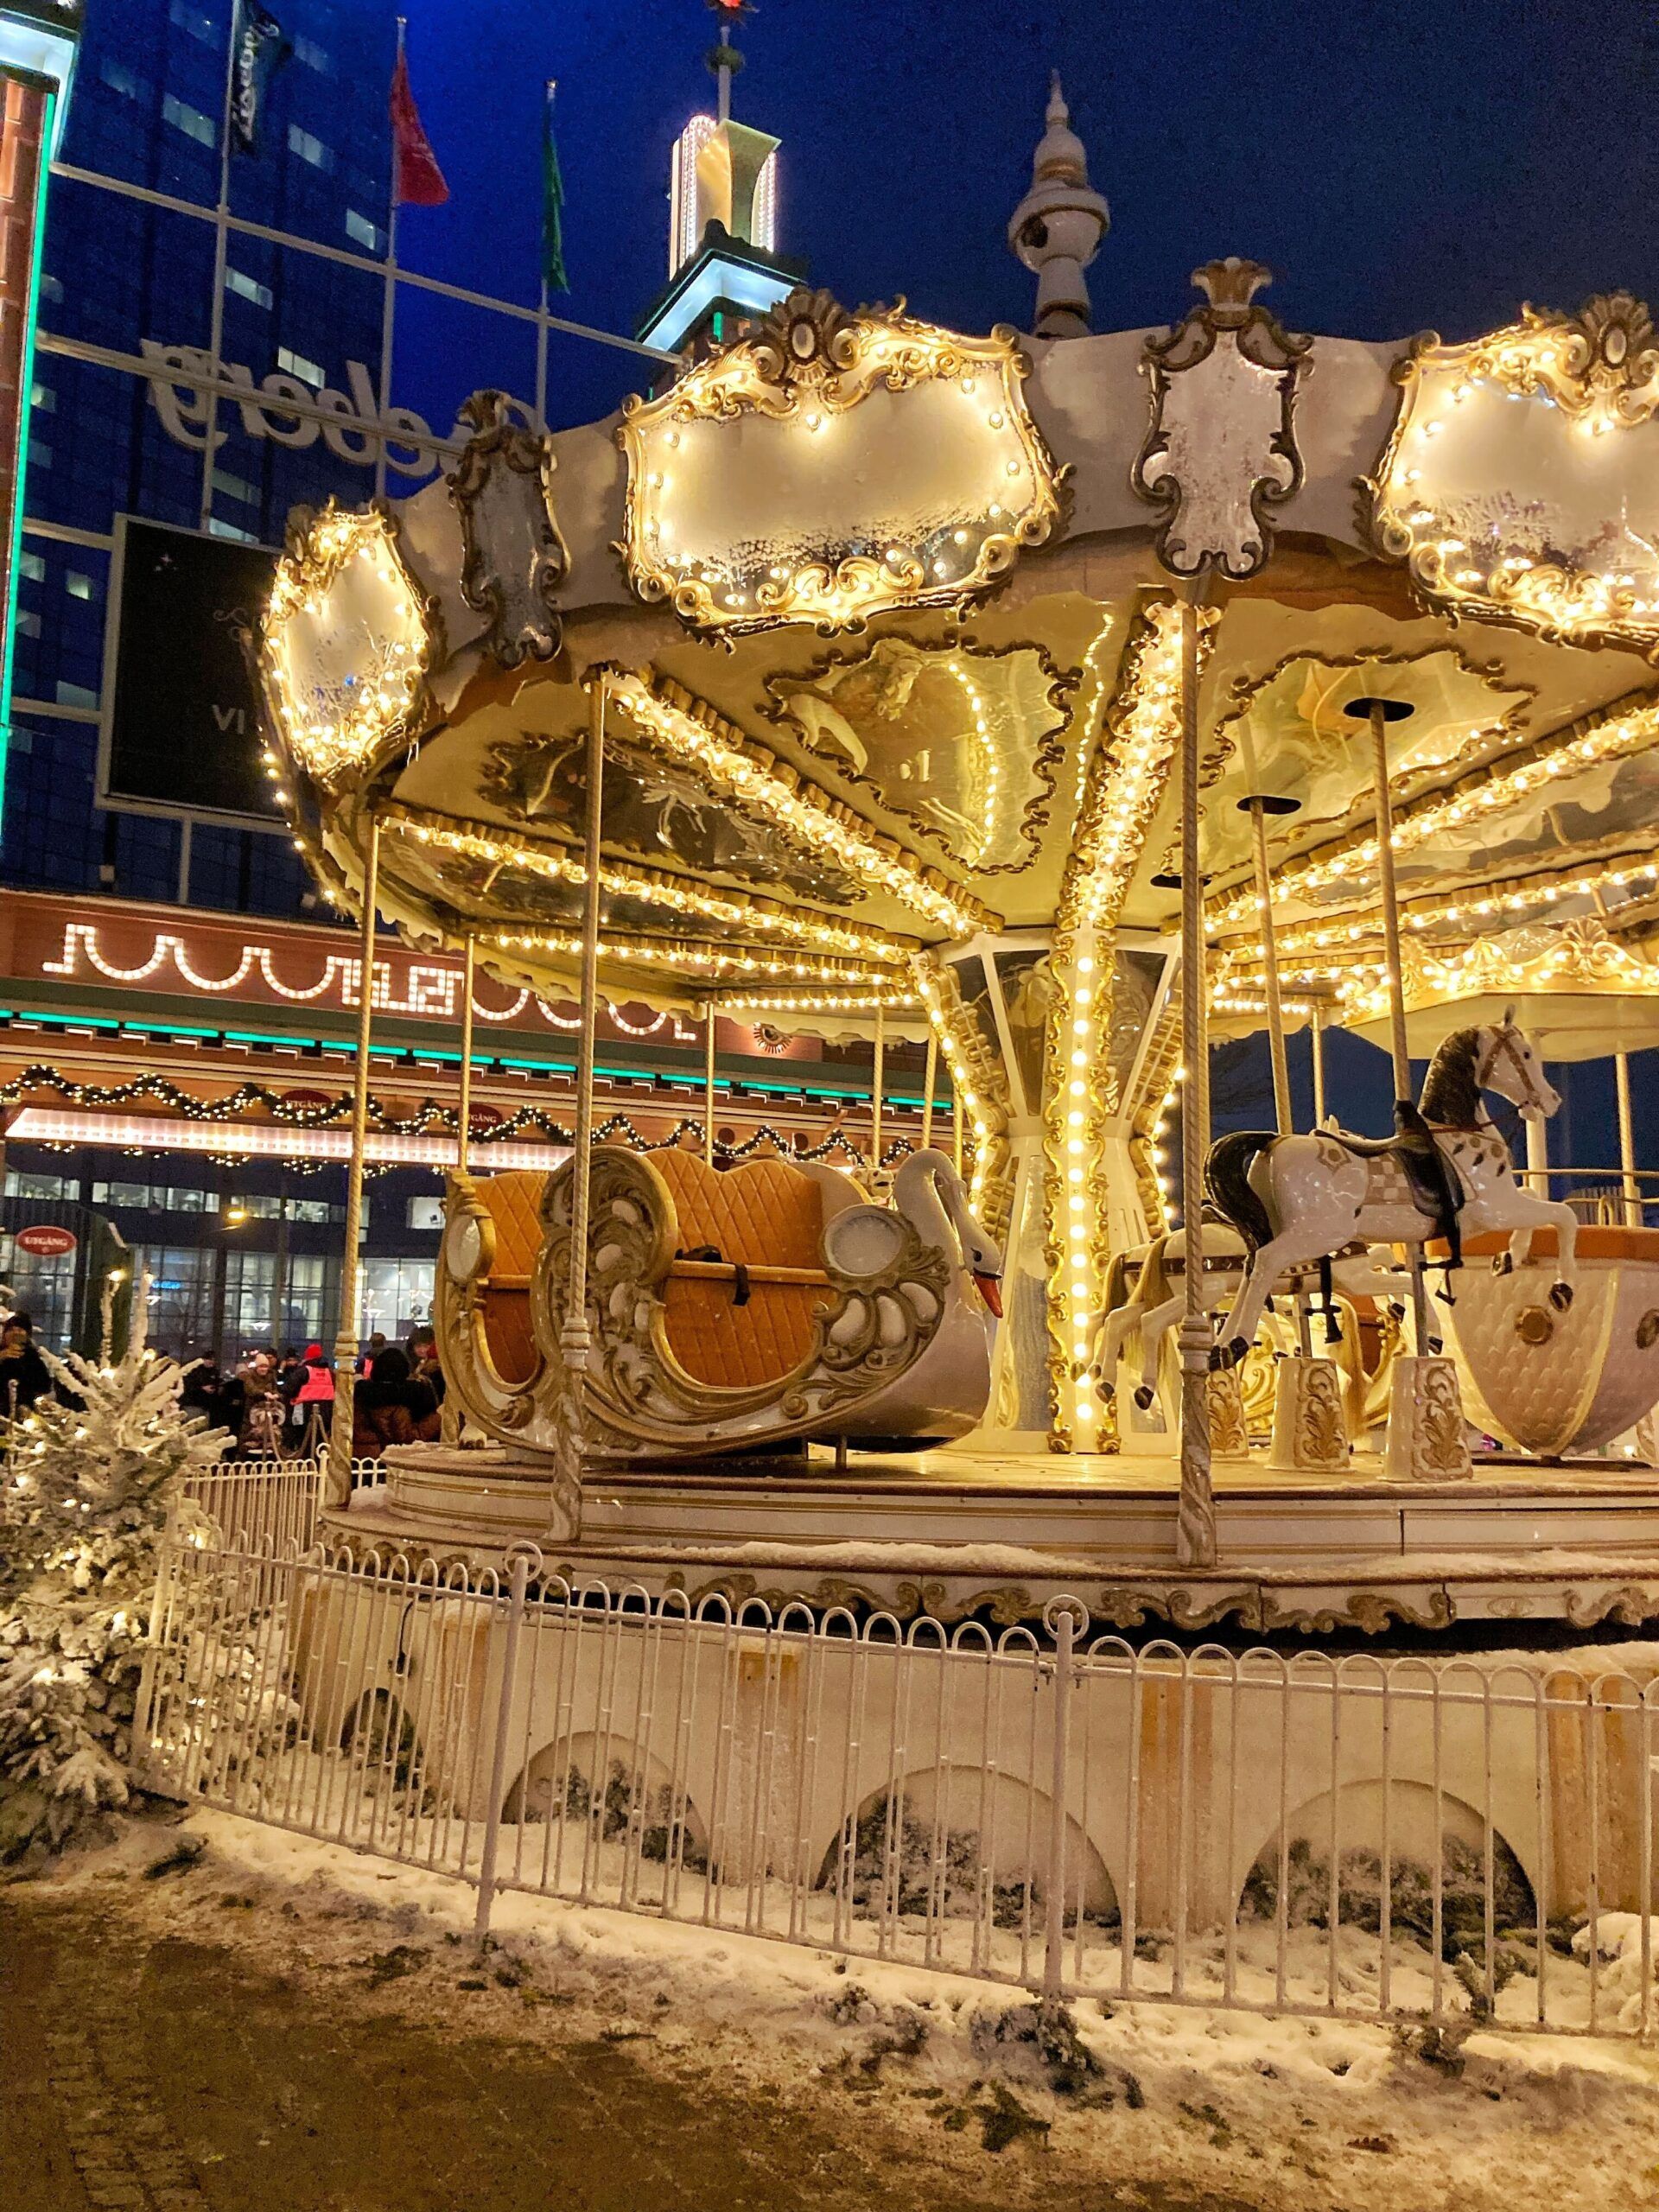 A carousel aglow with colorful lights, casting a warm ambiance.